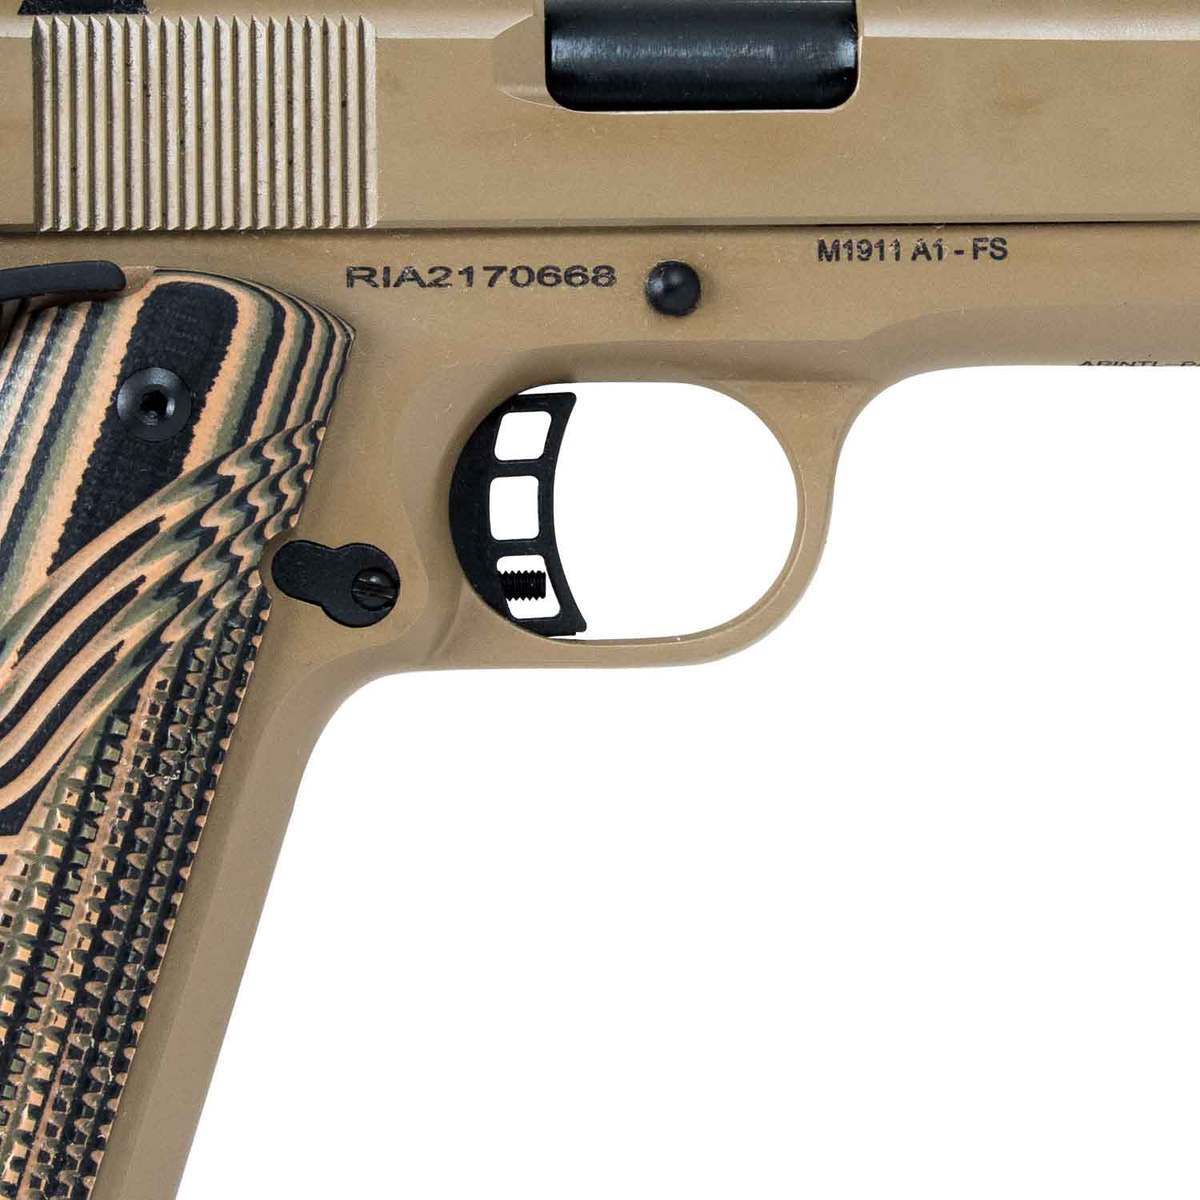 Rock Island M1911 A1 Fs Tactical 45 Auto Acp 5in Camoblack Pistol 81 Rounds Tan 7186